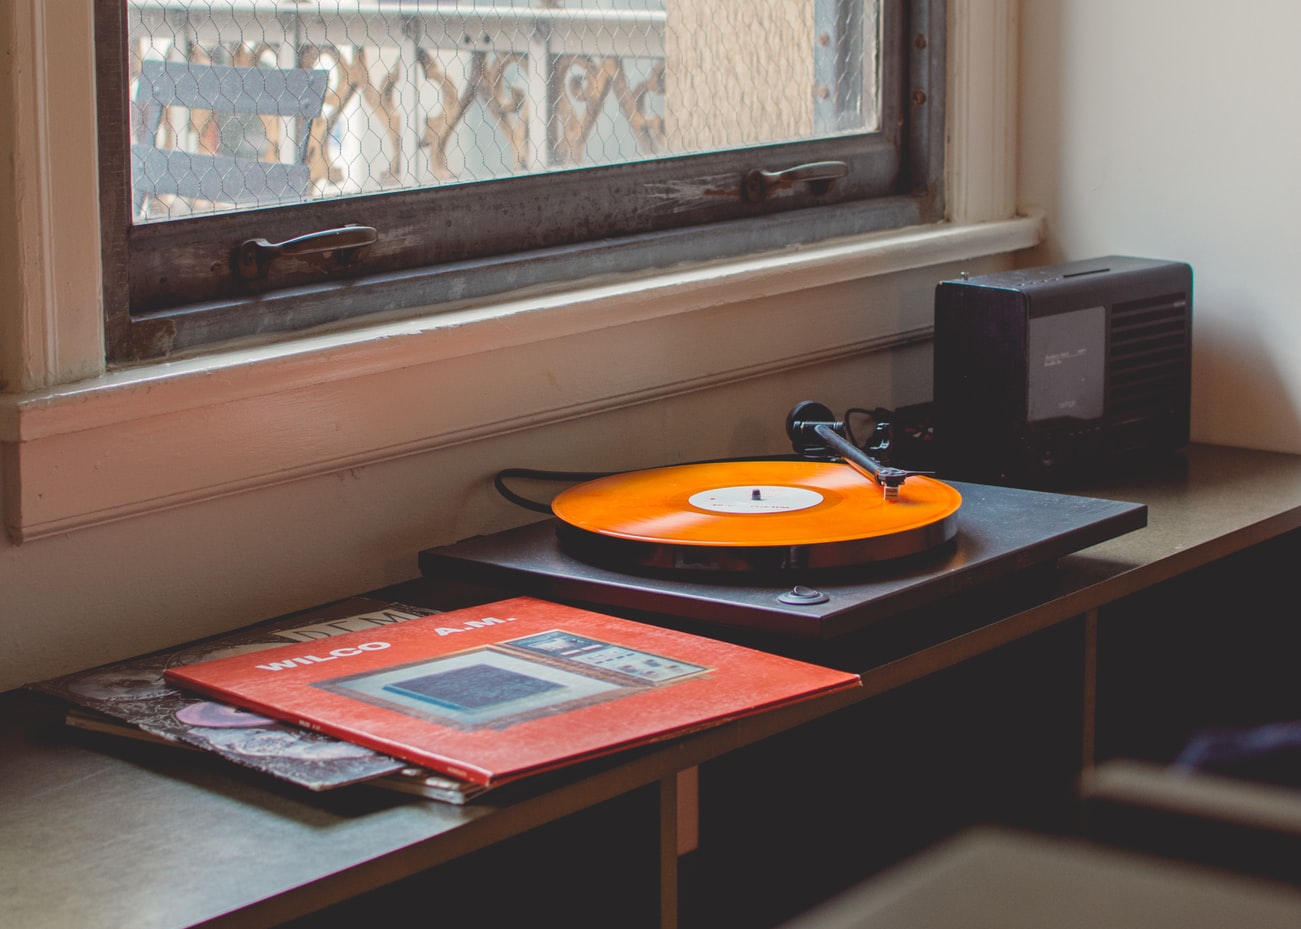 A record player an individual can use to listen to recovery songs